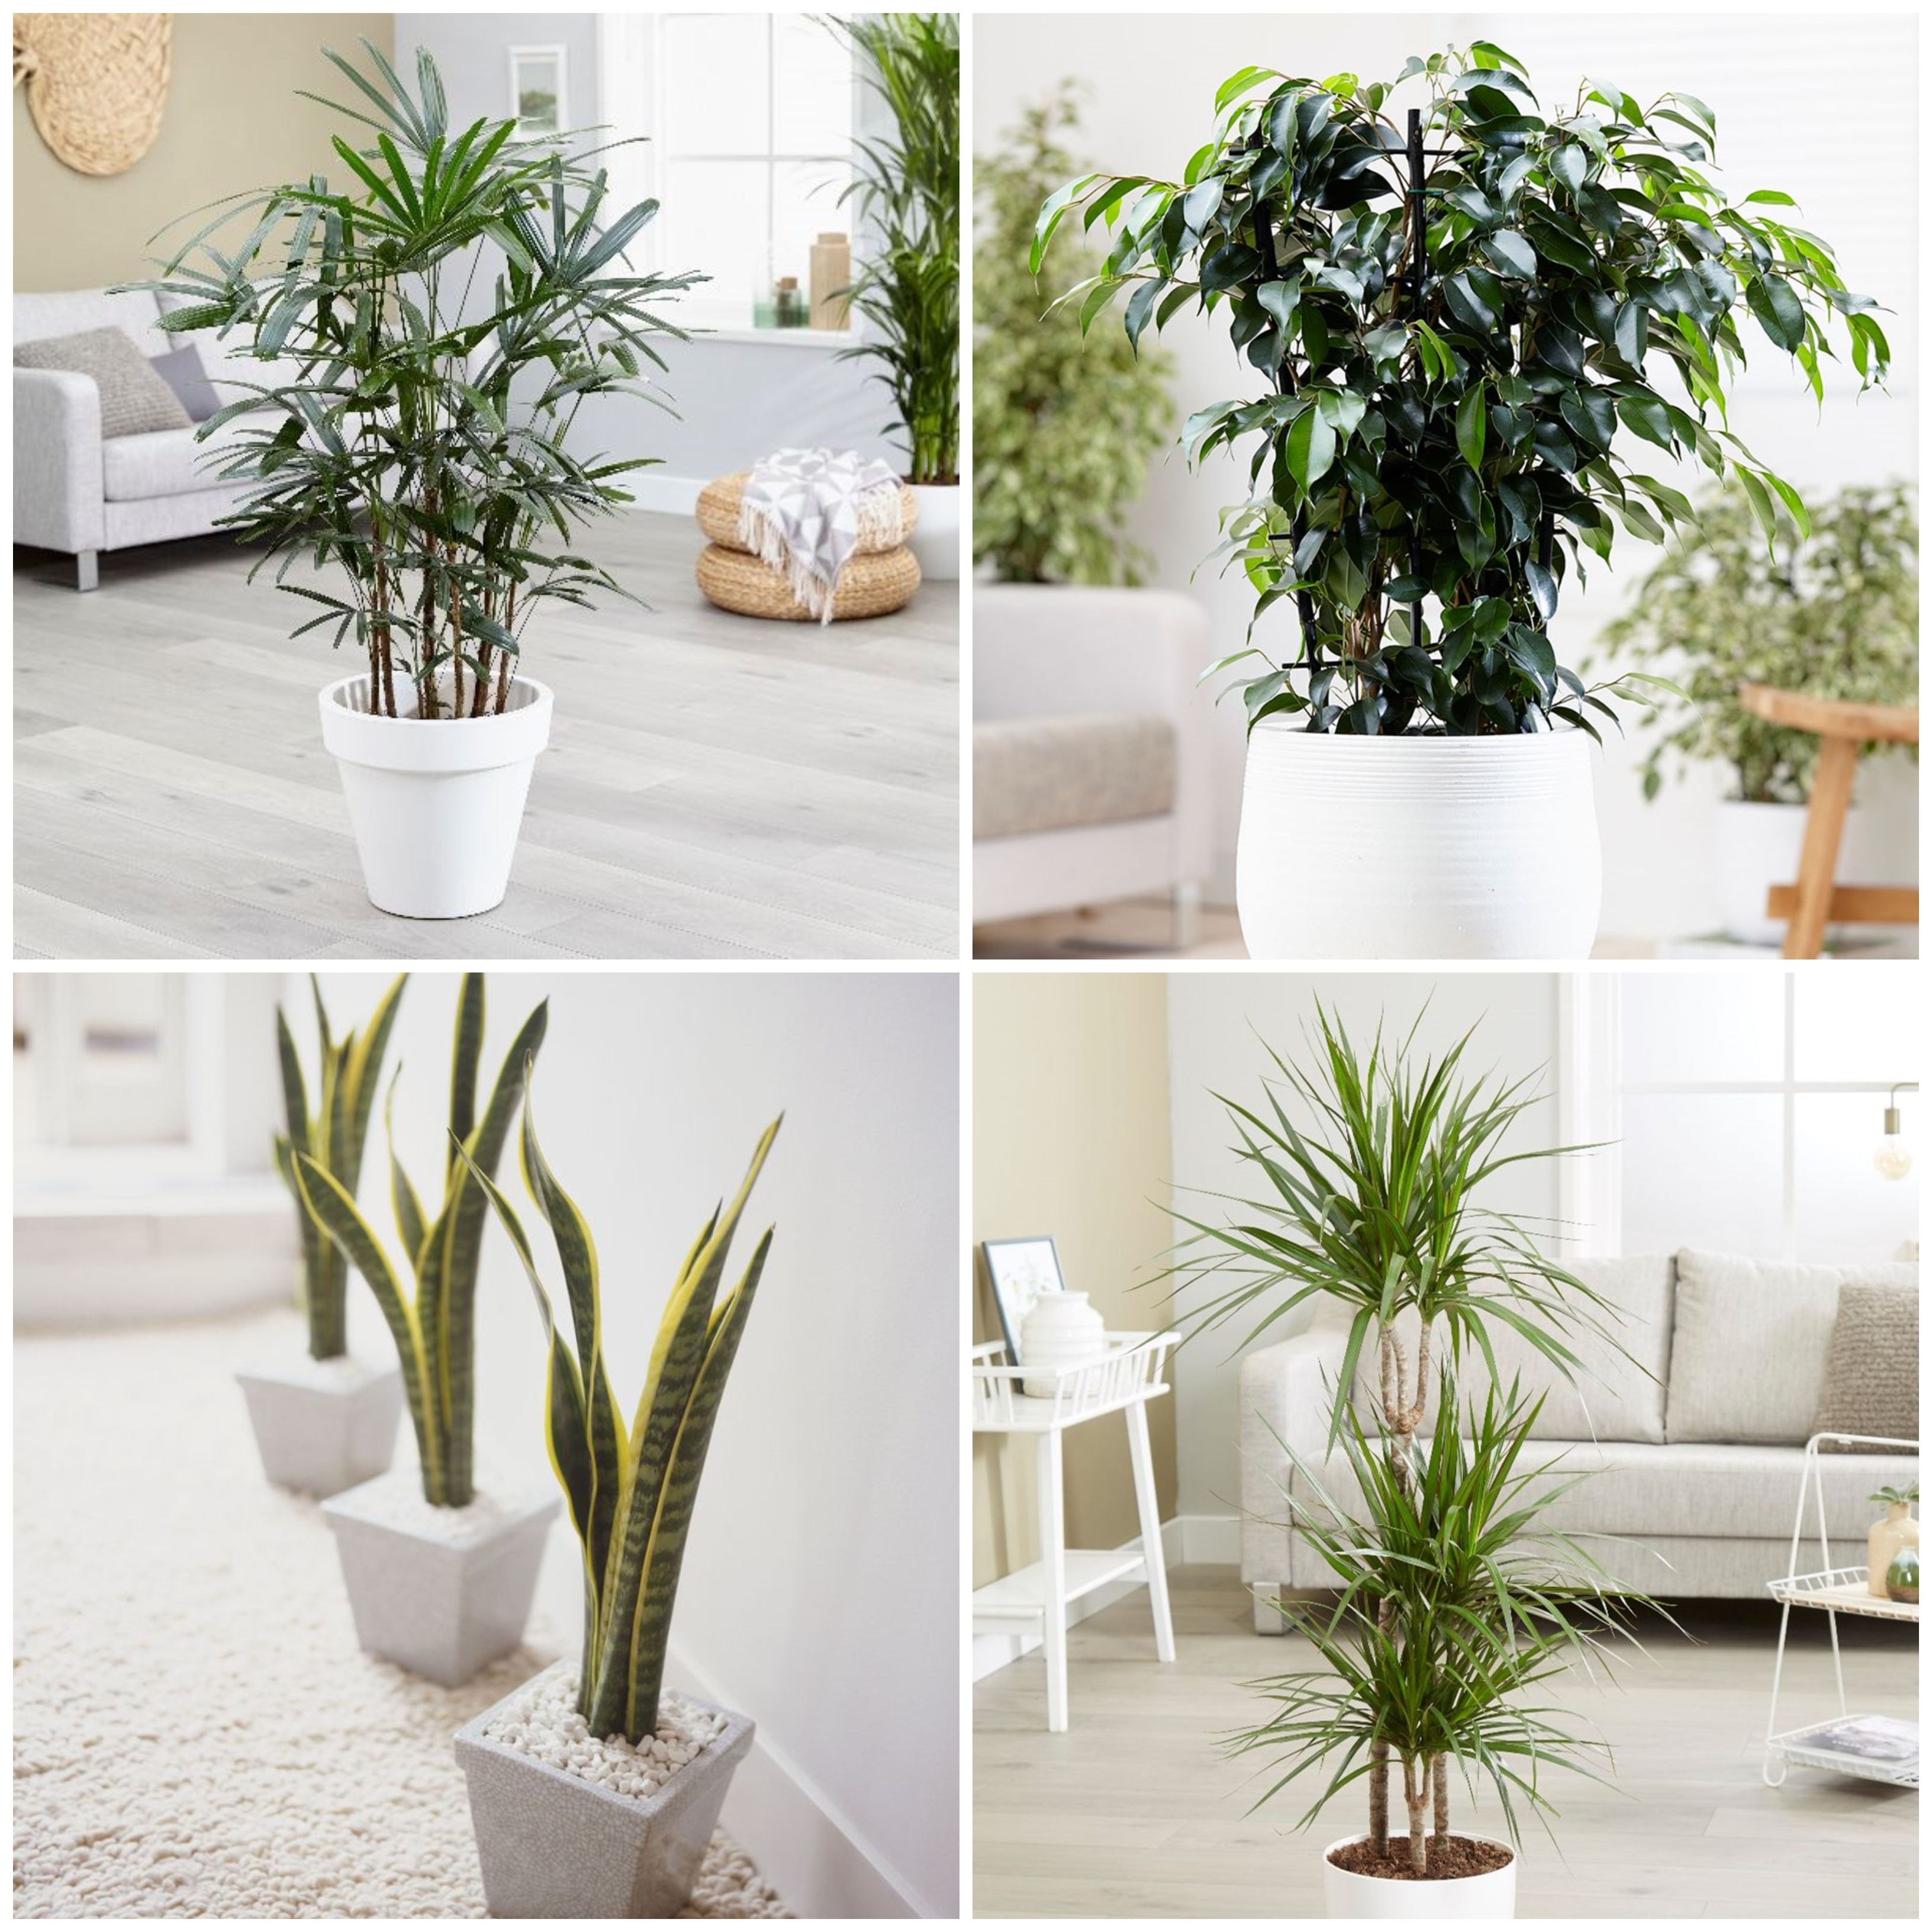 Are you aware of the daily toxins you are inhaling? These top 5 indoor Plants are the best for clean air in your home.